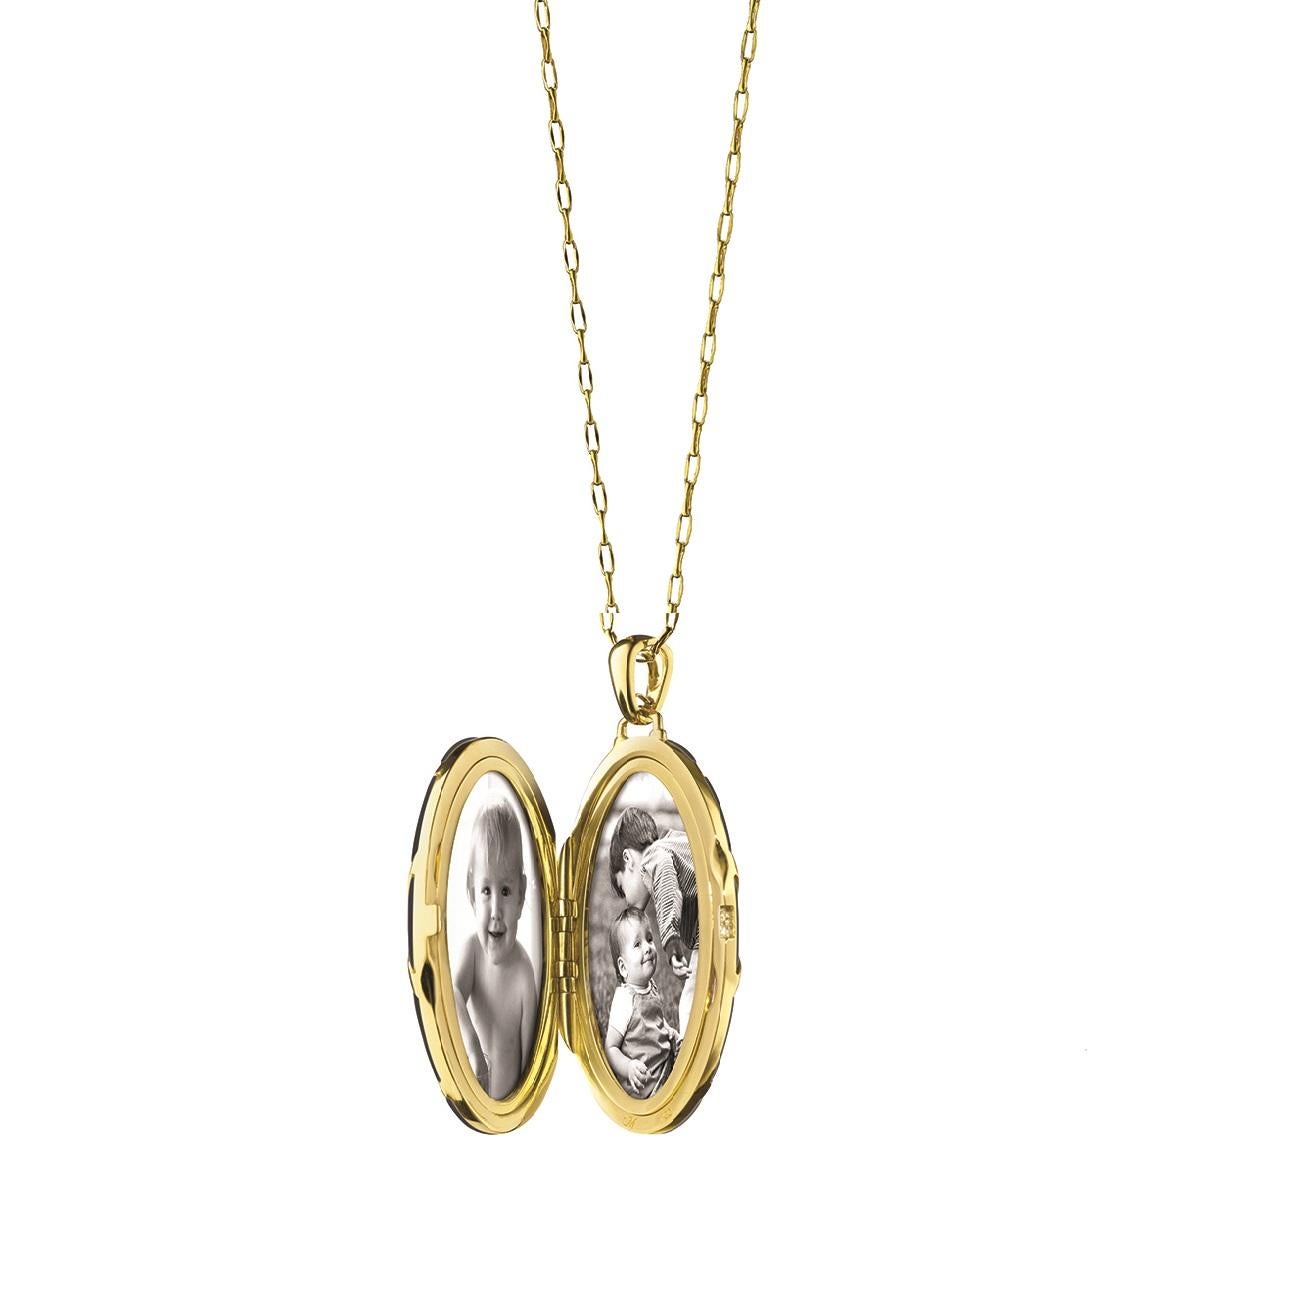 This elegant Monica Rich Kosann 18K Yellow Gold and Black Ceramic Locket with a chevron design is presented on a 30